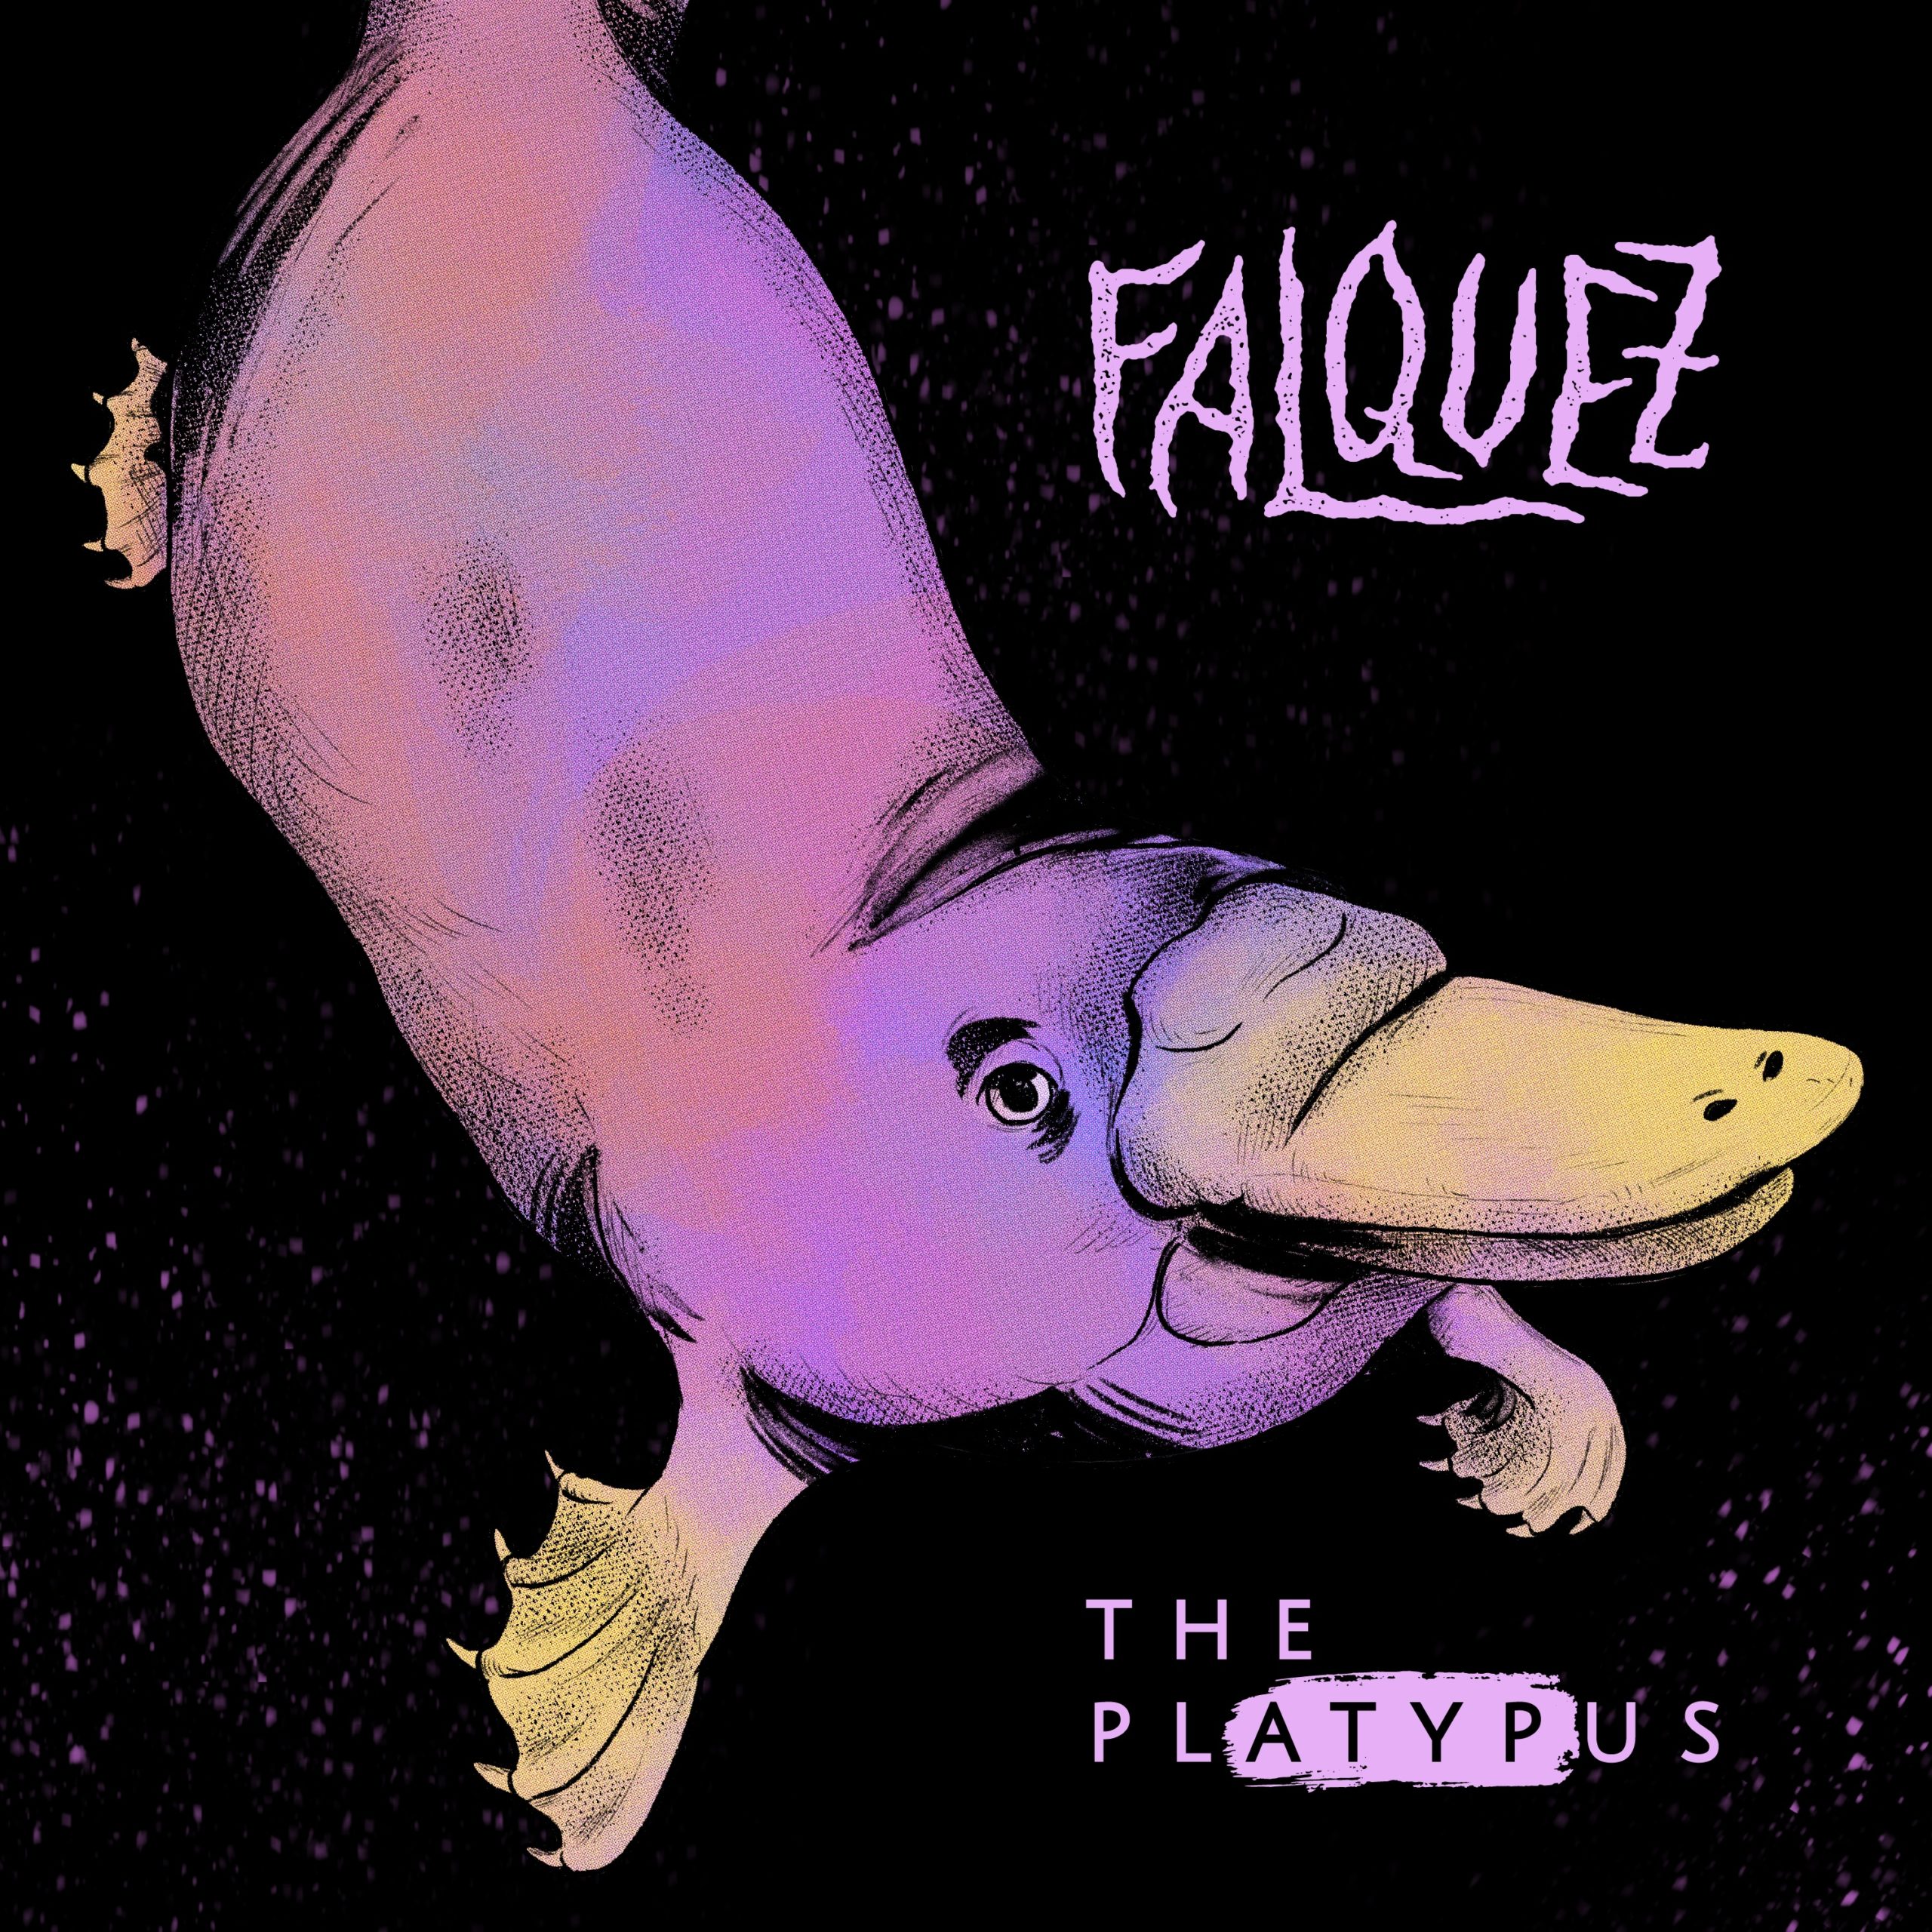 Falquez - The Platypus, the second single off "Known Behaviors".